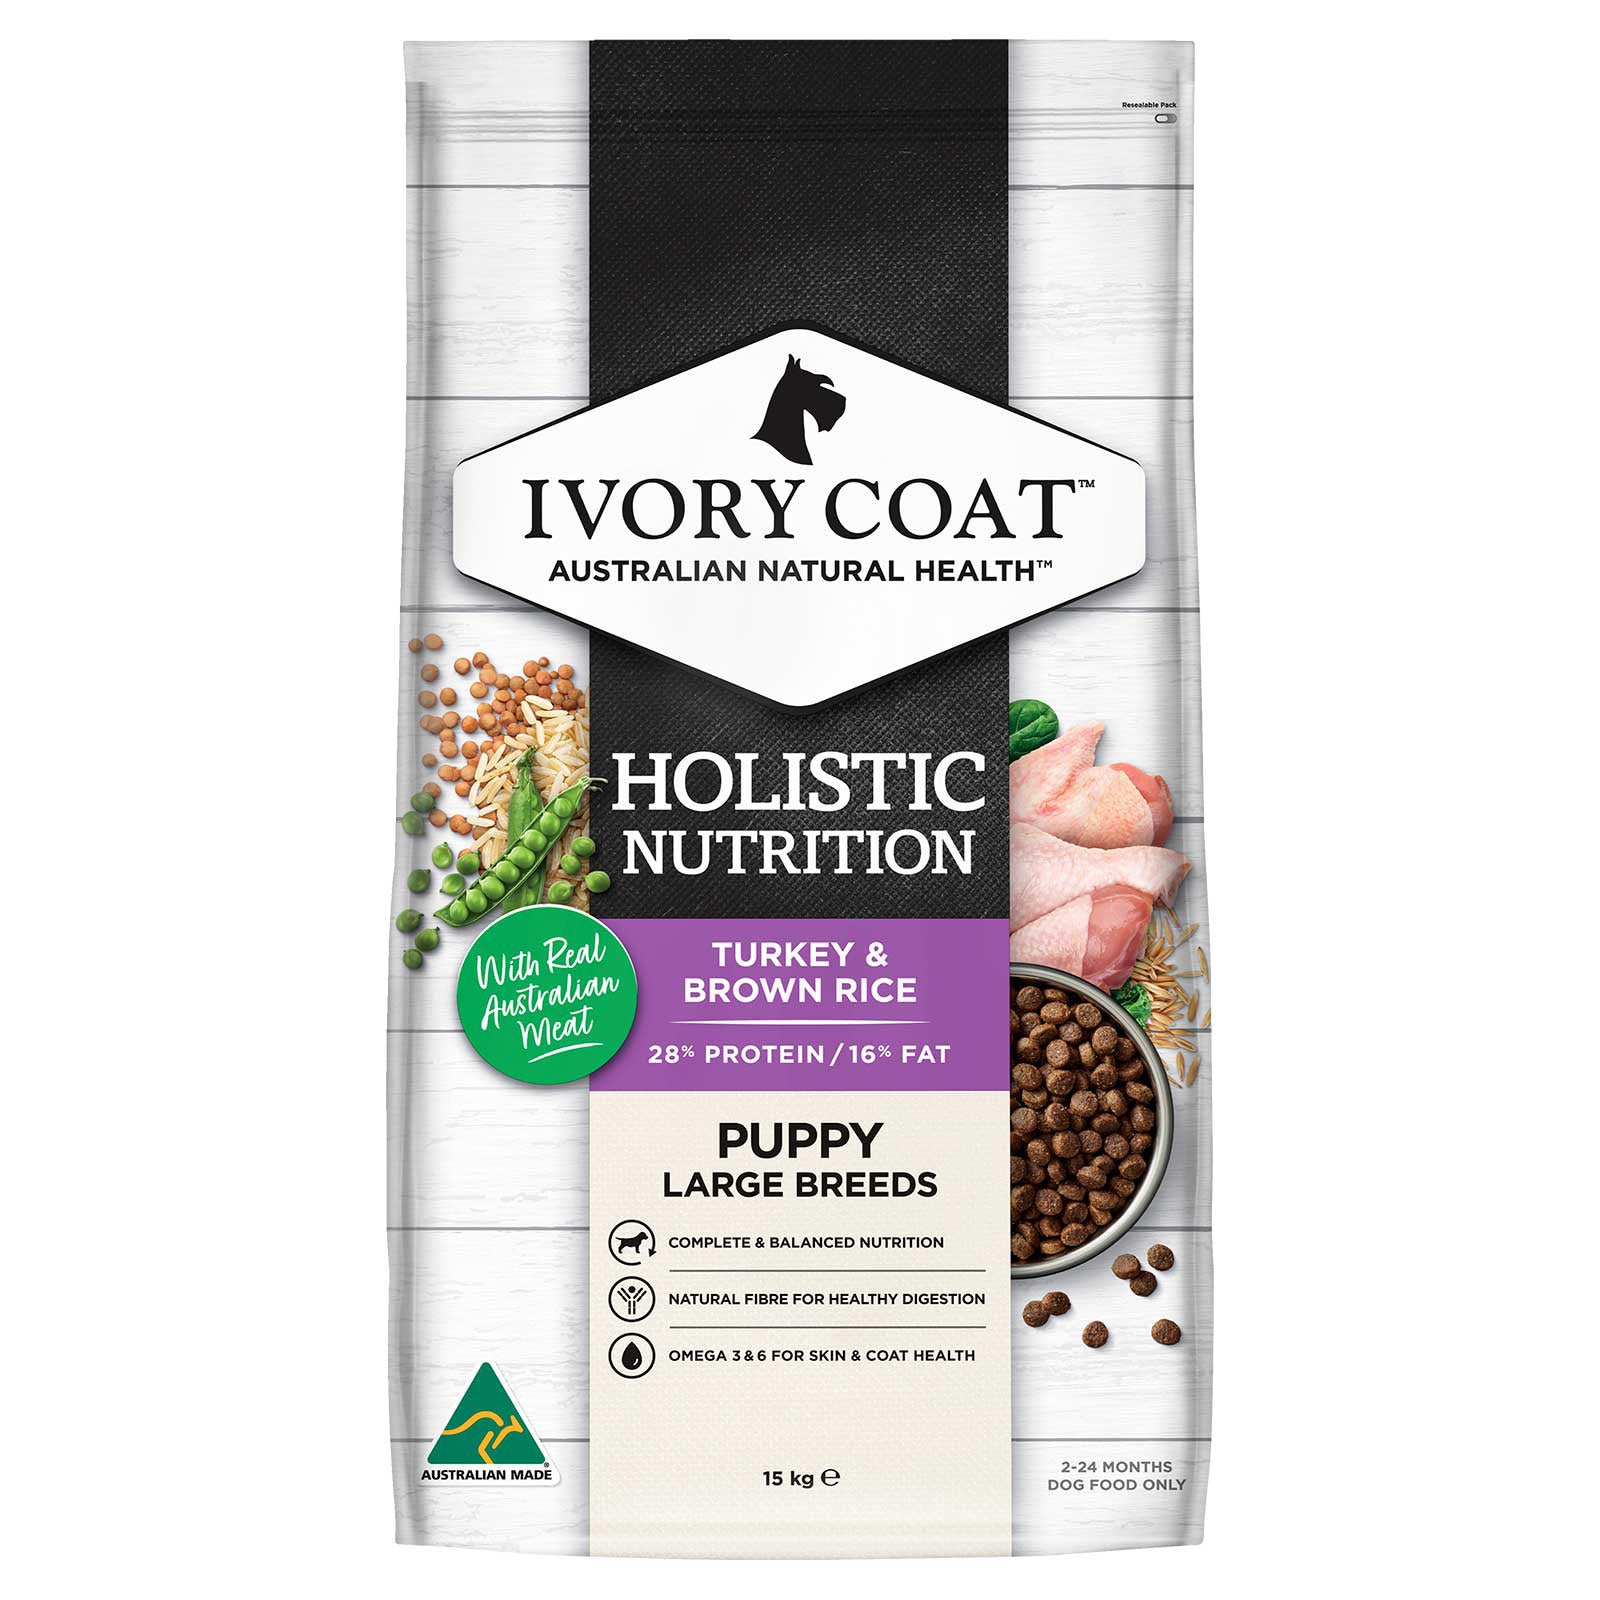 Ivory Coat Dog Food Puppy Large Breed Turkey & Brown Rice